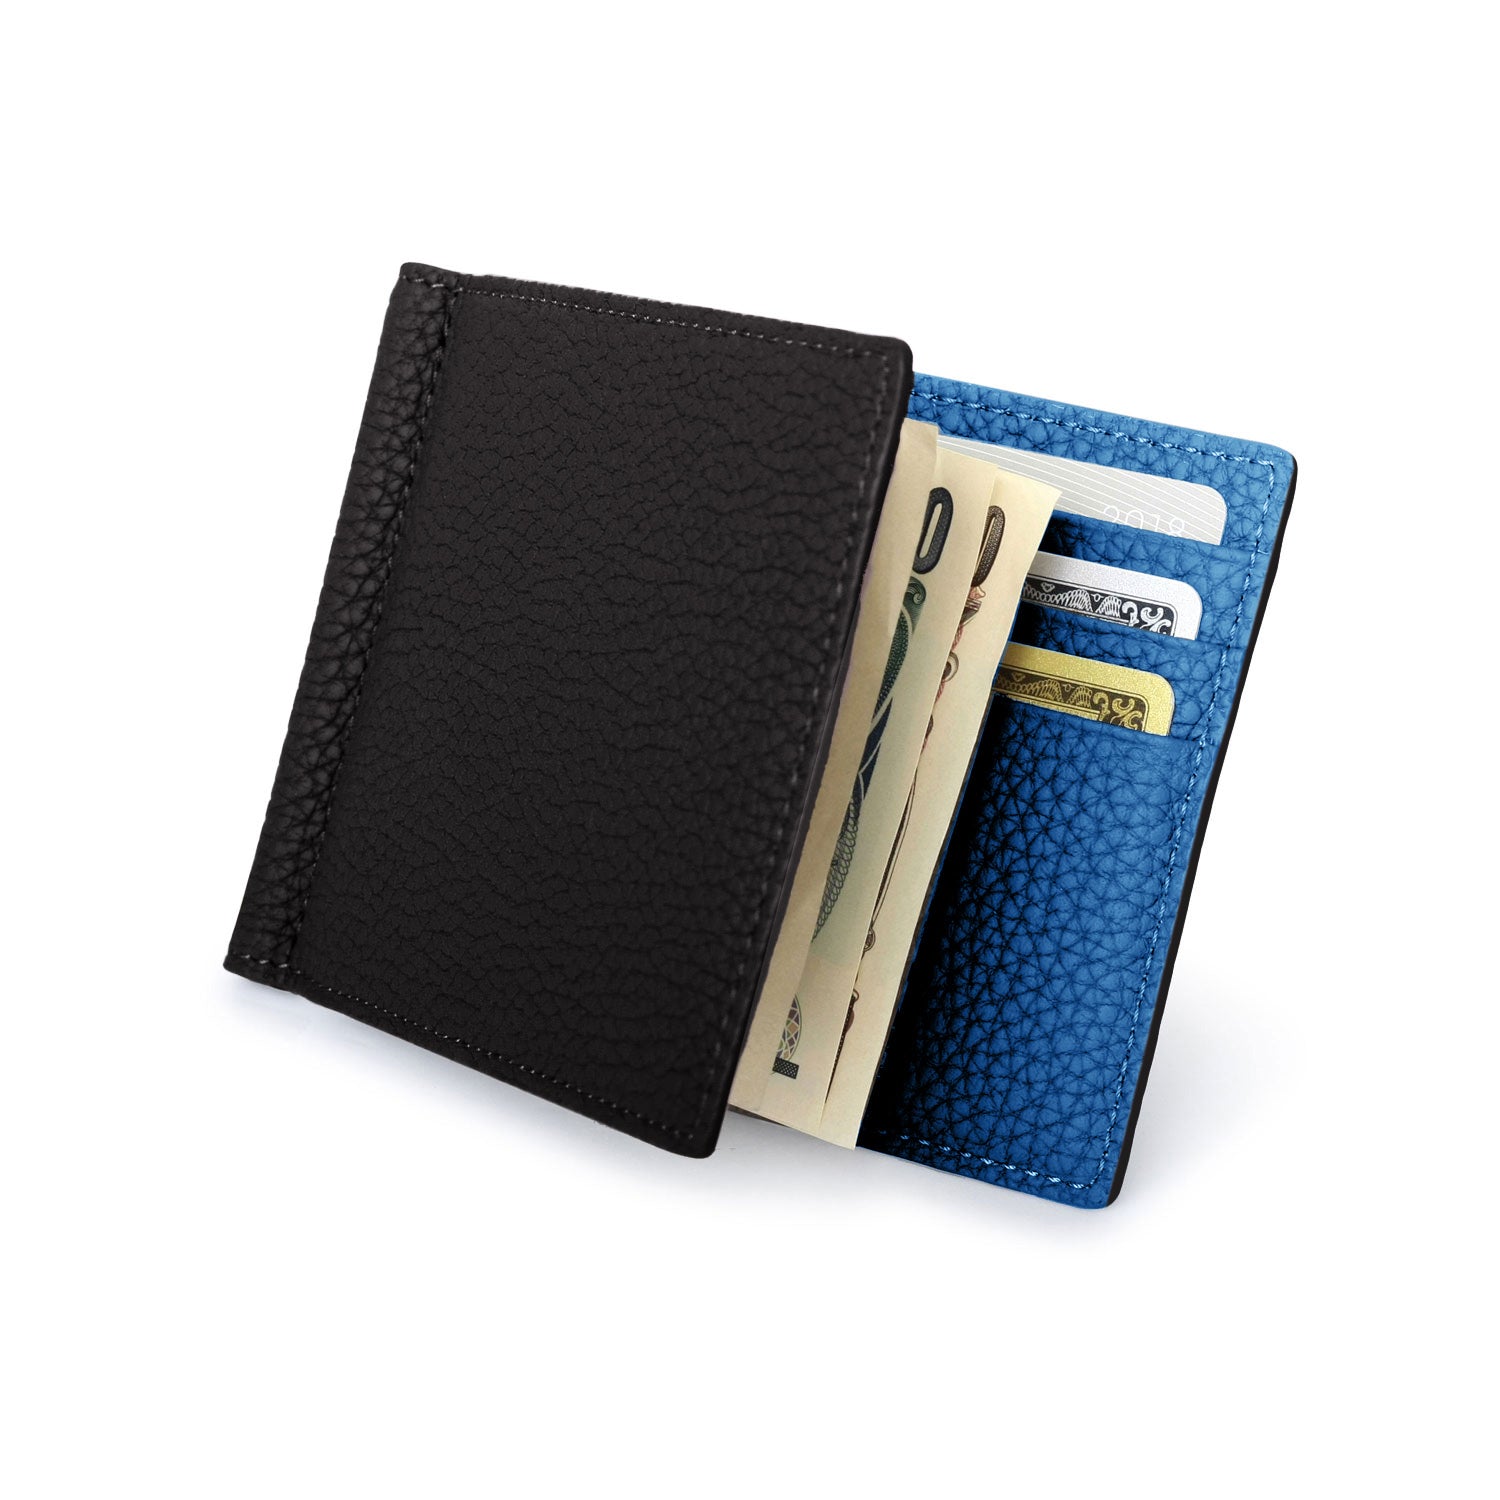 SAVOIA × BONAVENTURA Bifold Bill Clip with Coin Case in Shrink Leather